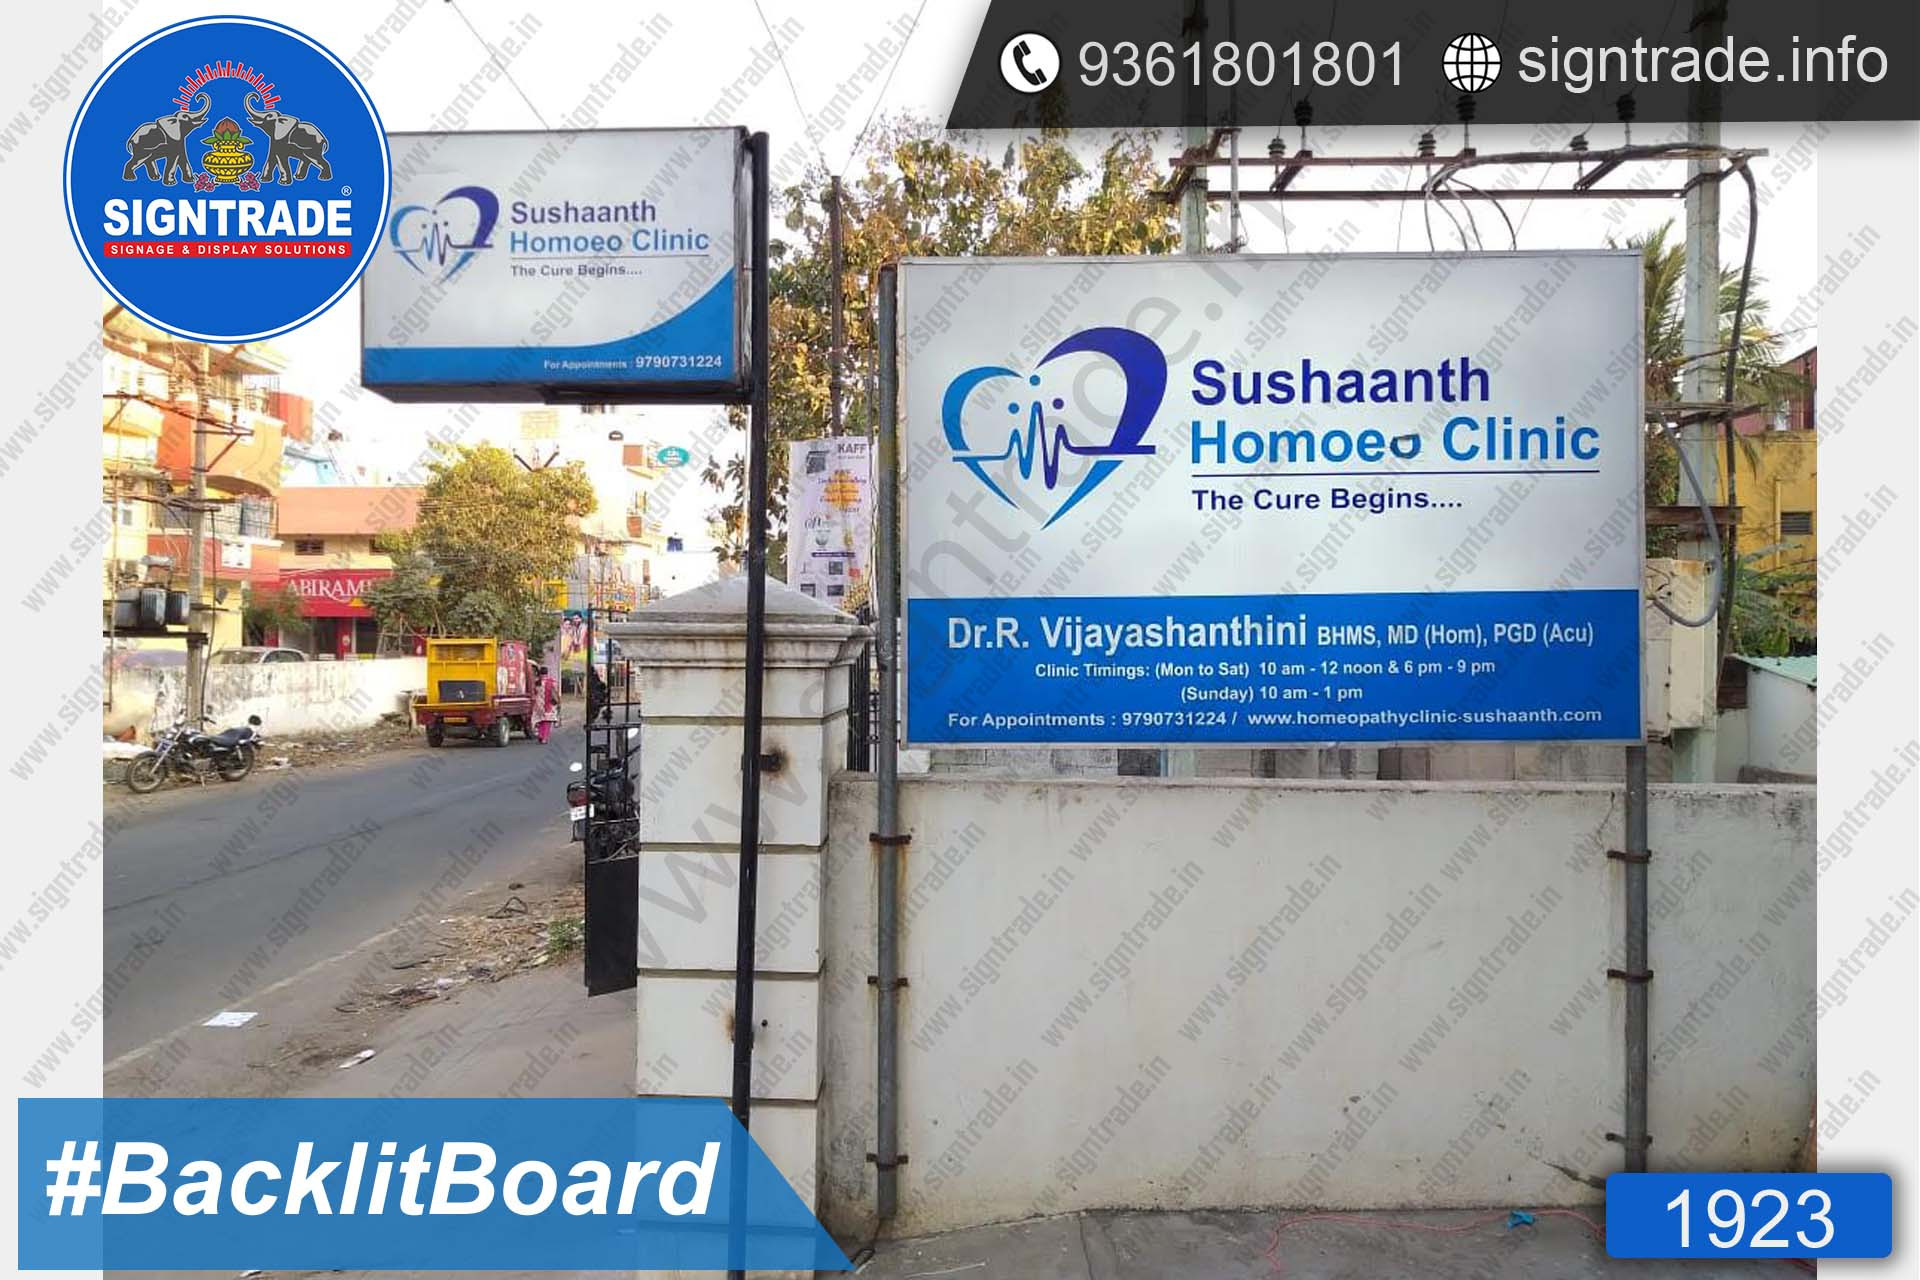 Sushaanth Homeo Clinic Backlit Board